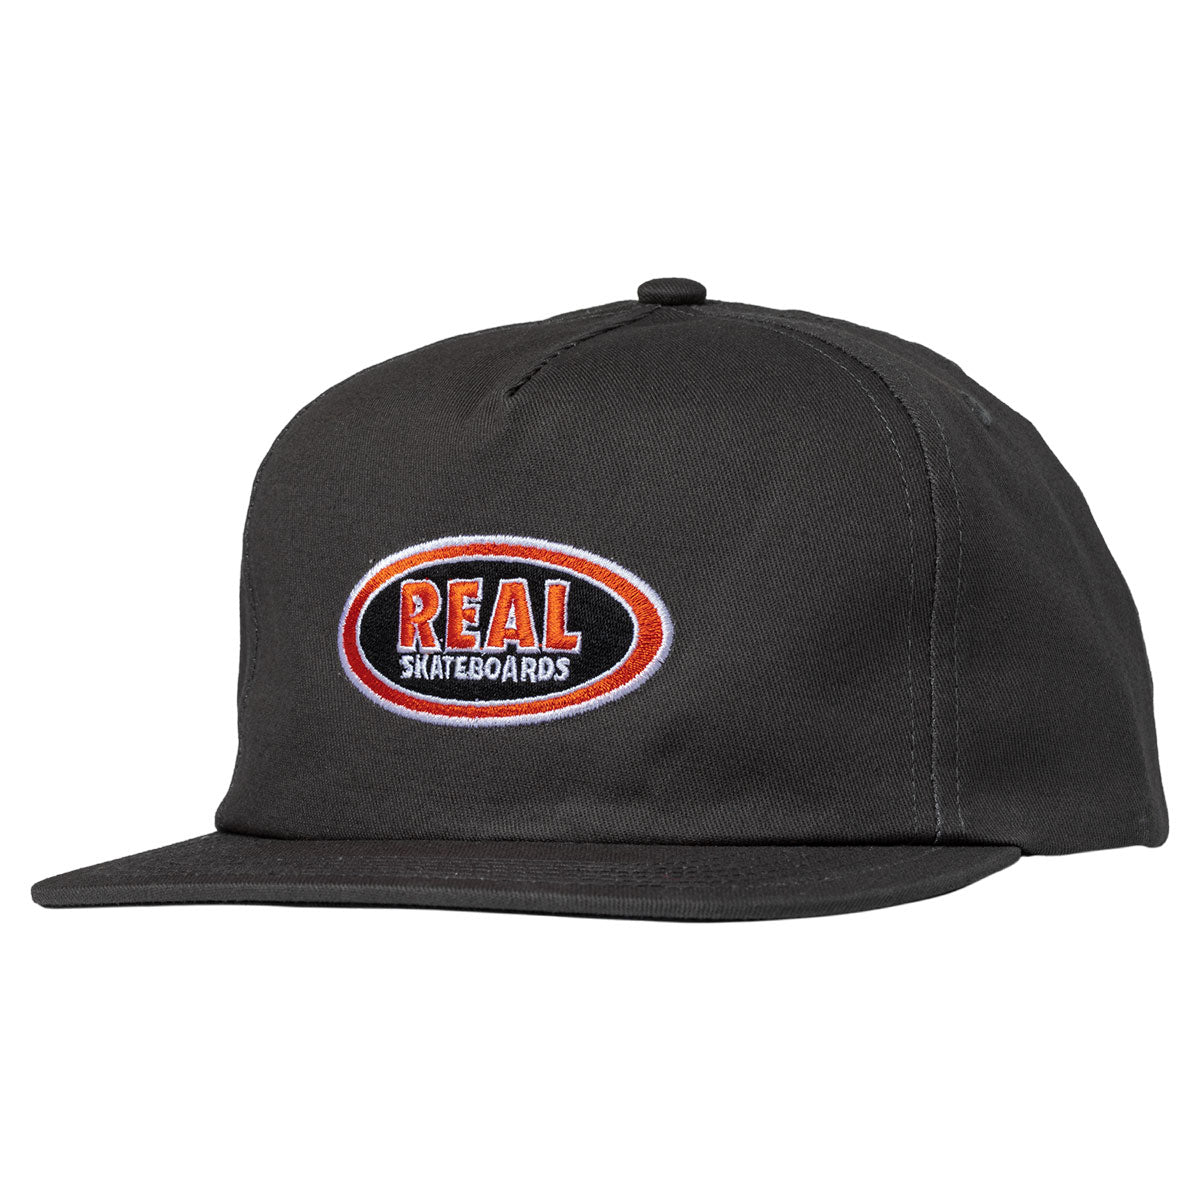 Real Oval Emb Snapback Hat - Charcoal/Red image 1